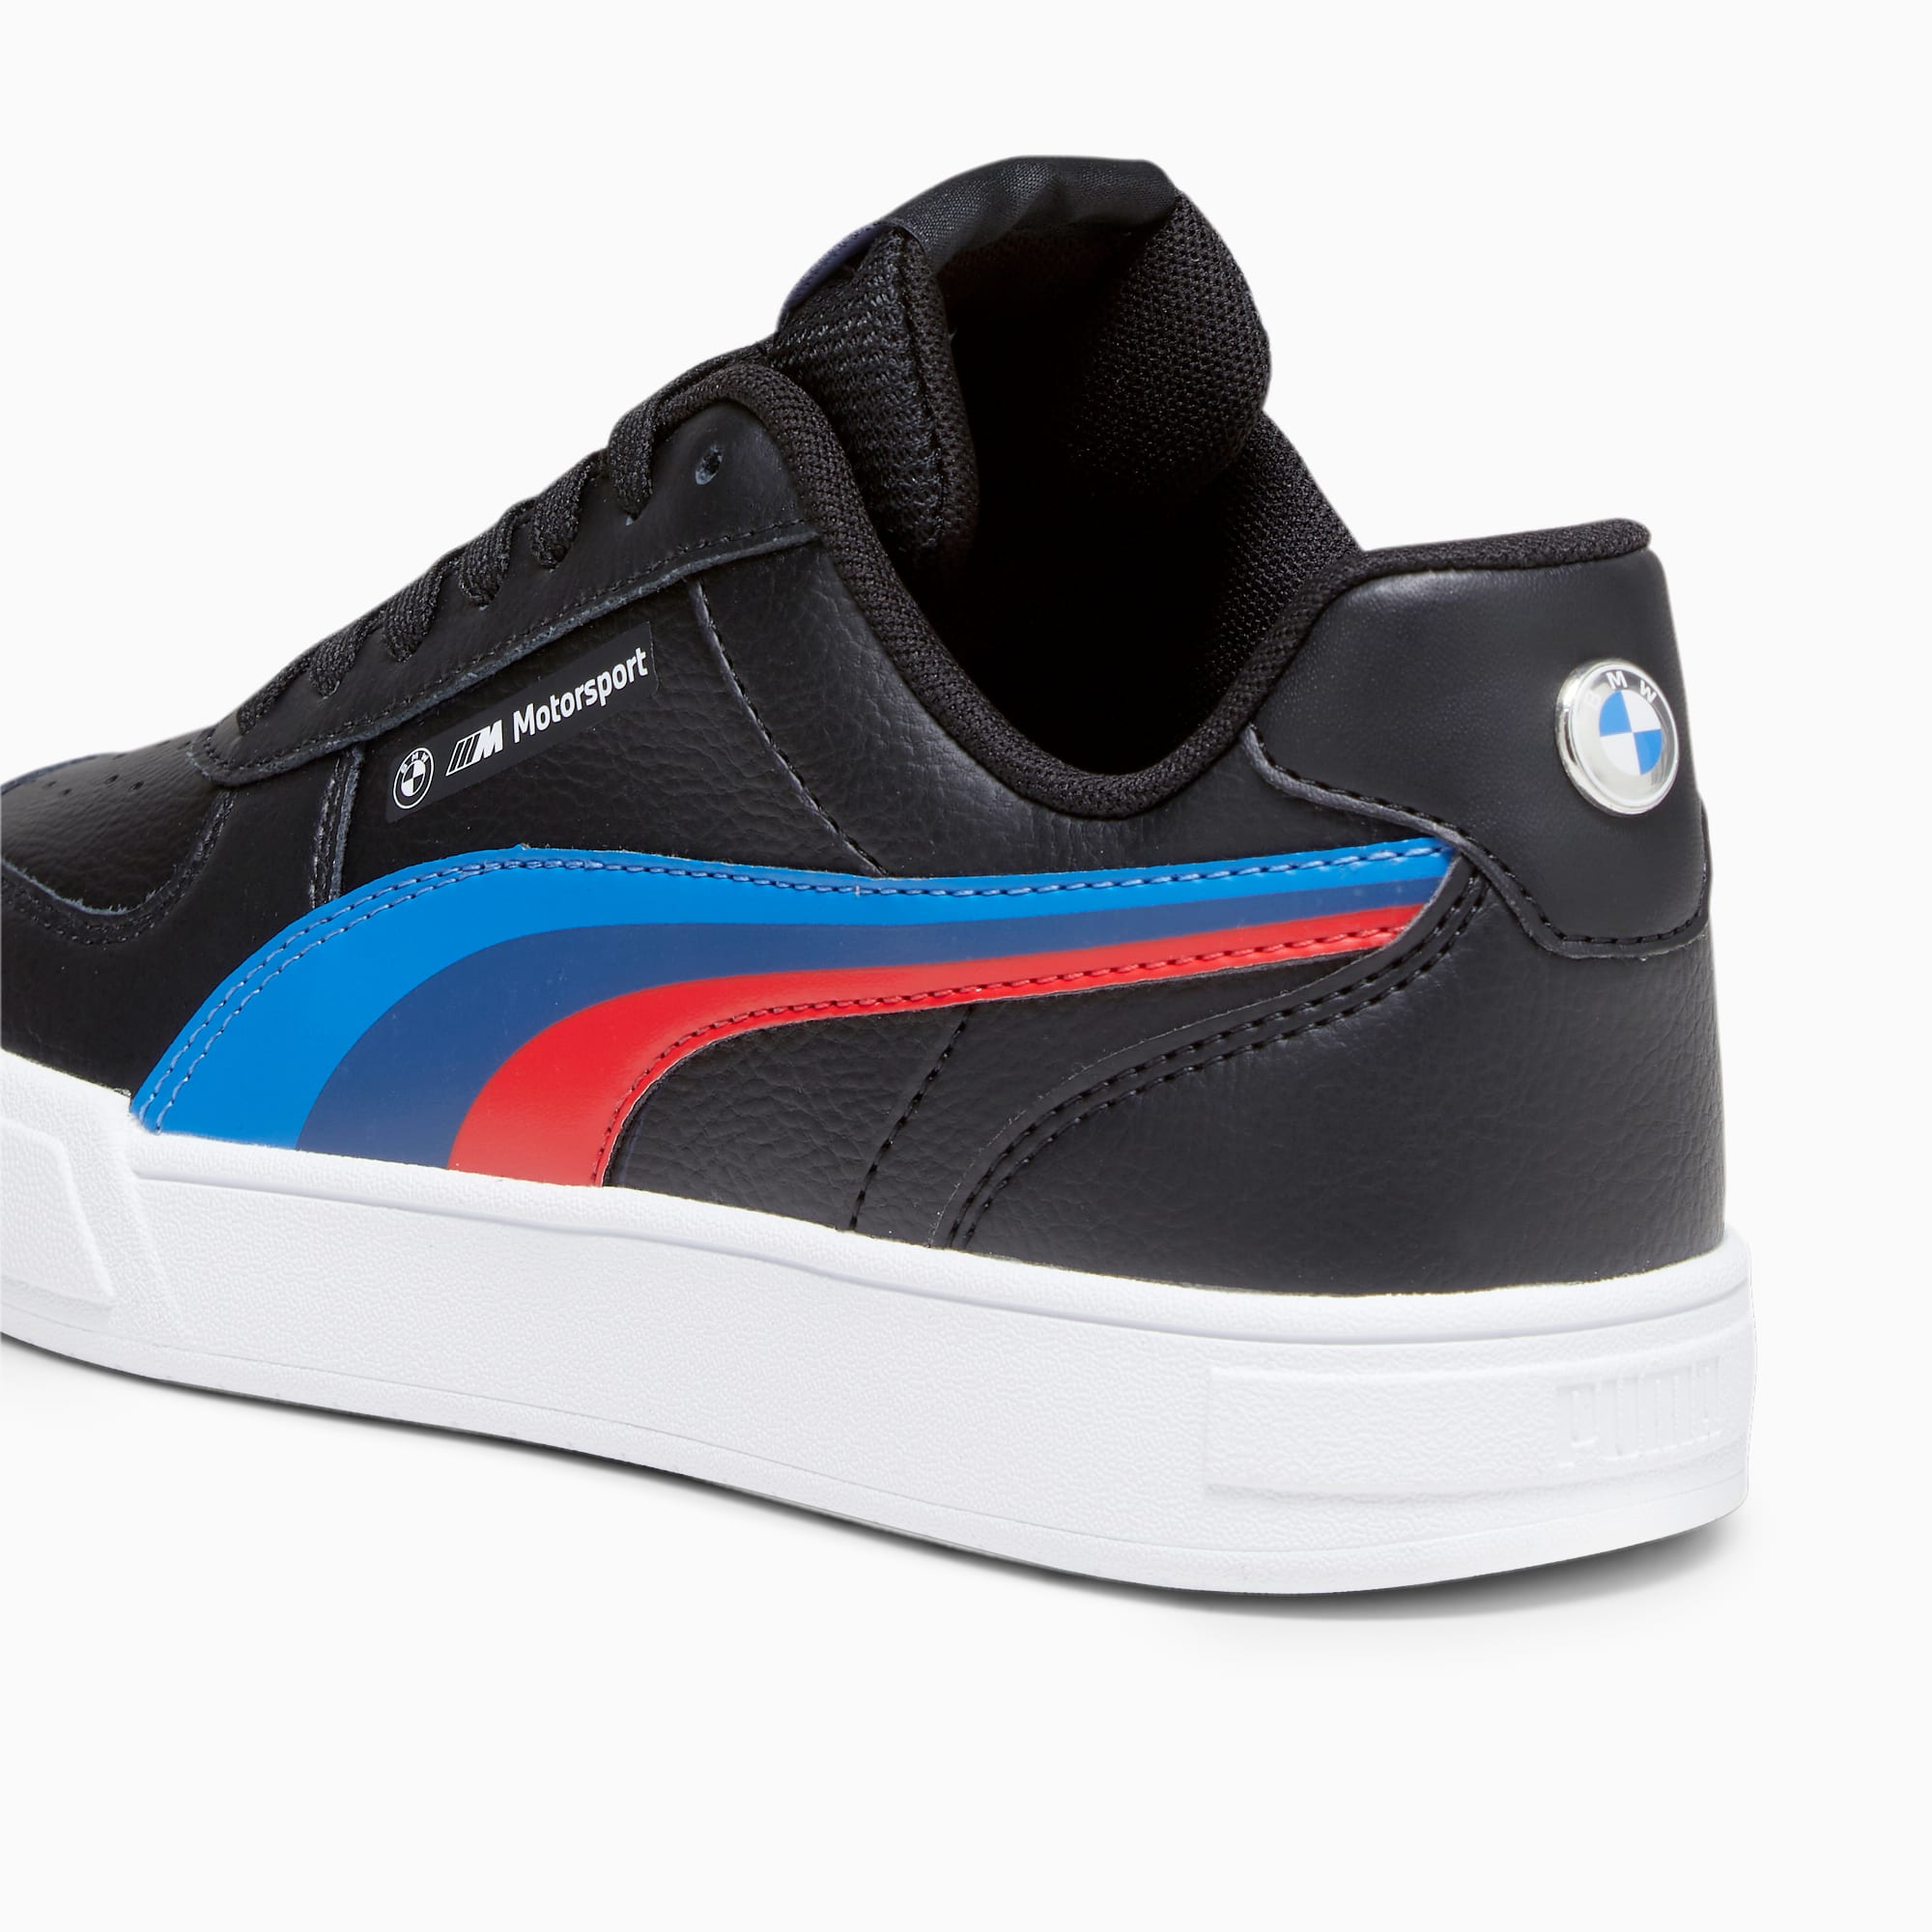 PUMA BMW M Motorsport Caven Youth Sneakers, Black, Size 35,5, Shoes